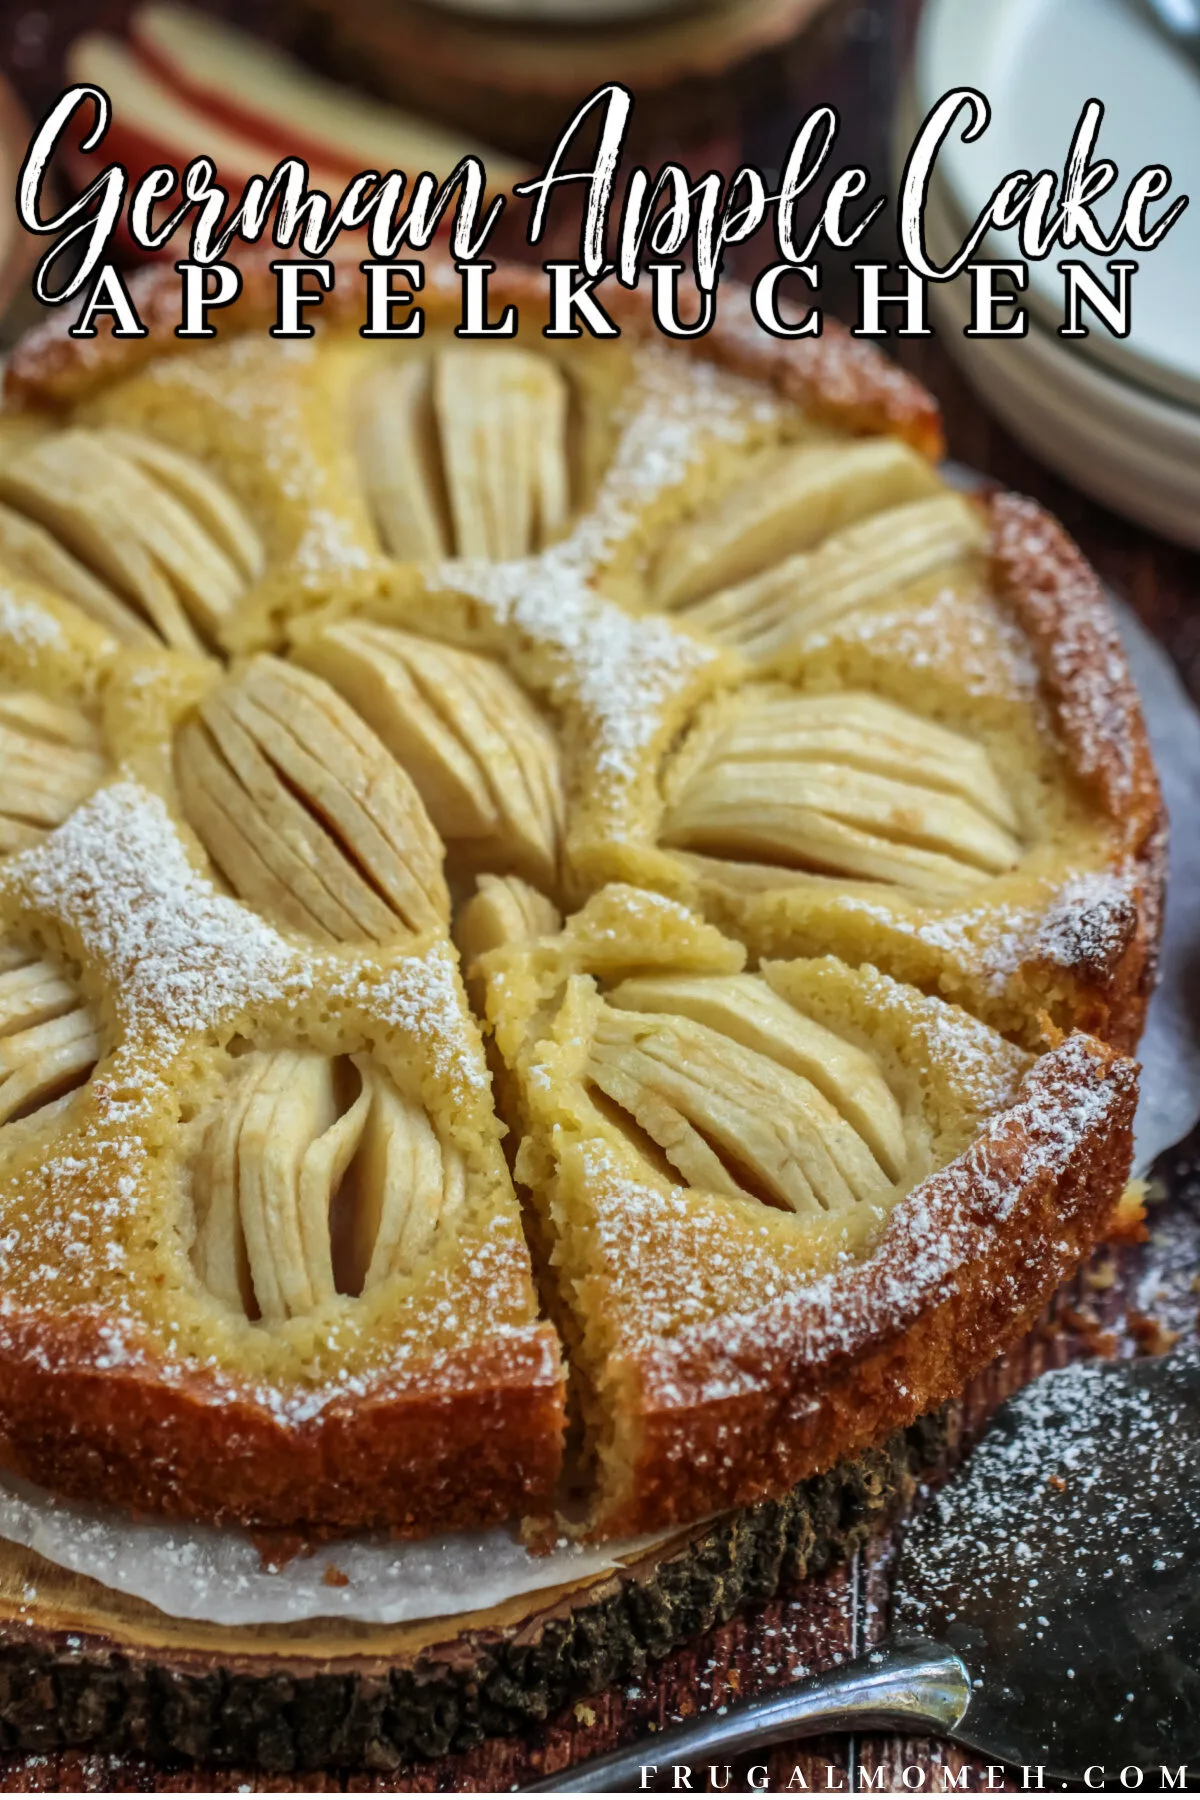 Classic German apple cake, Apfelkuchen, is moist and buttery. It's a simple and rustic cake made with fresh apples - a perfect fall dessert.